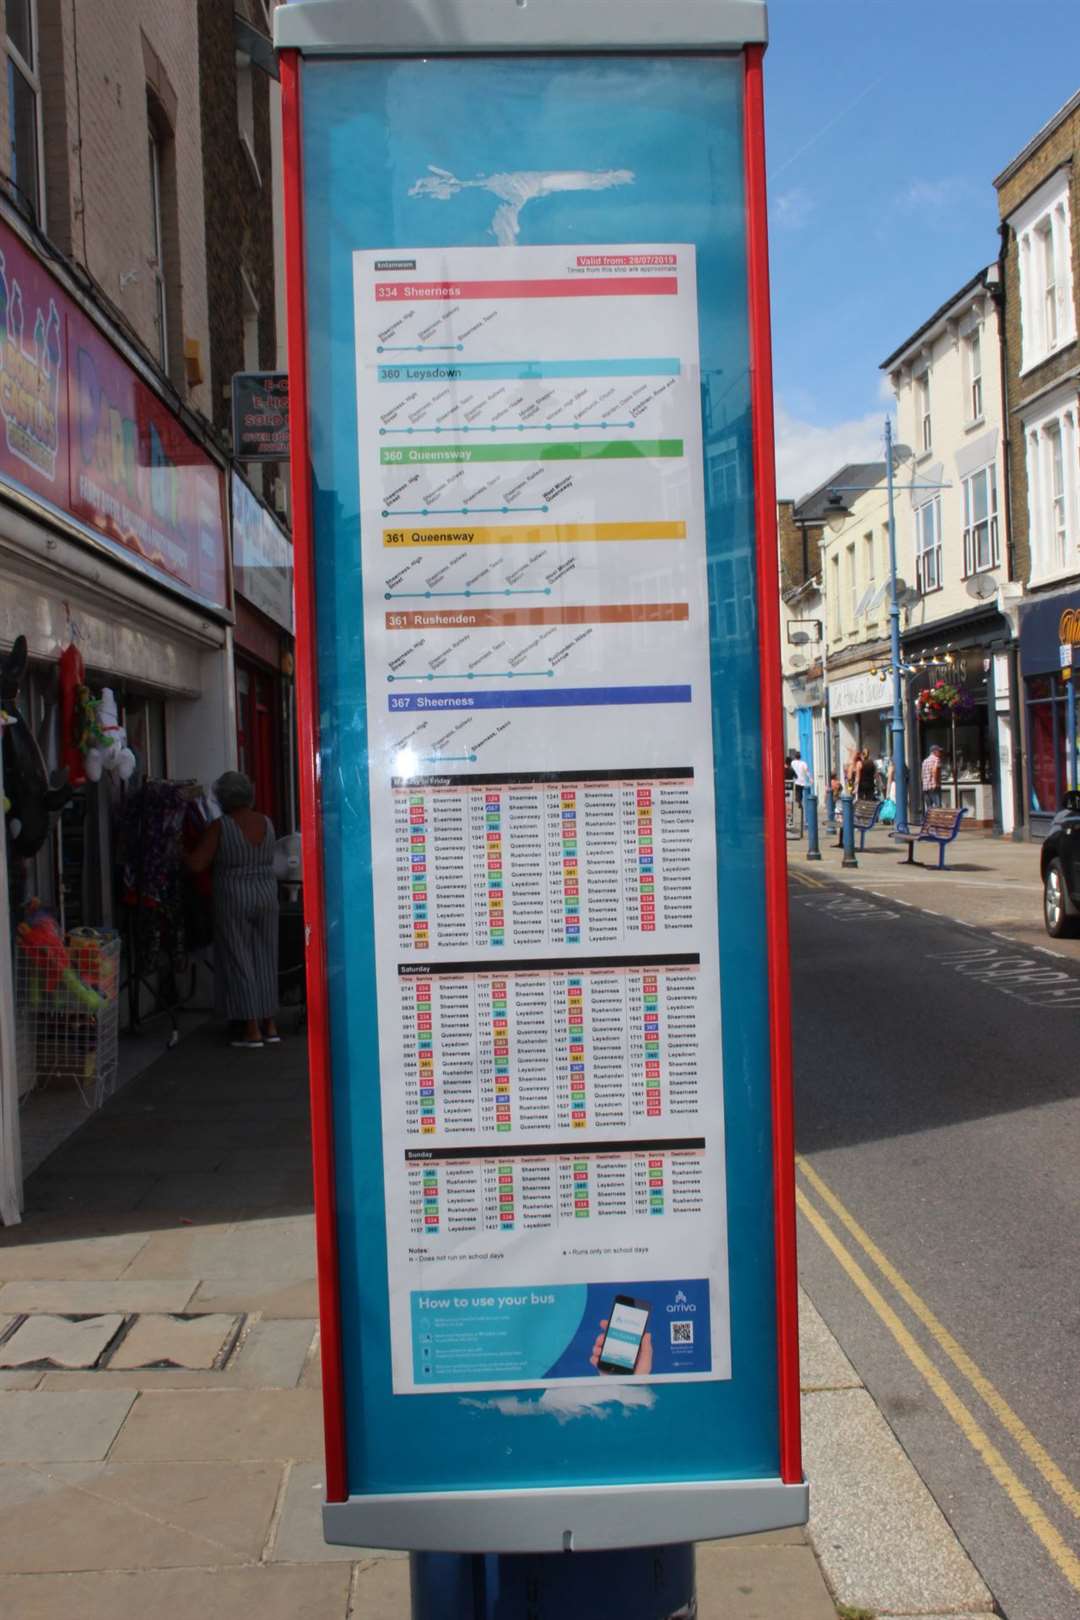 Before: how the bus stop timetable used to look